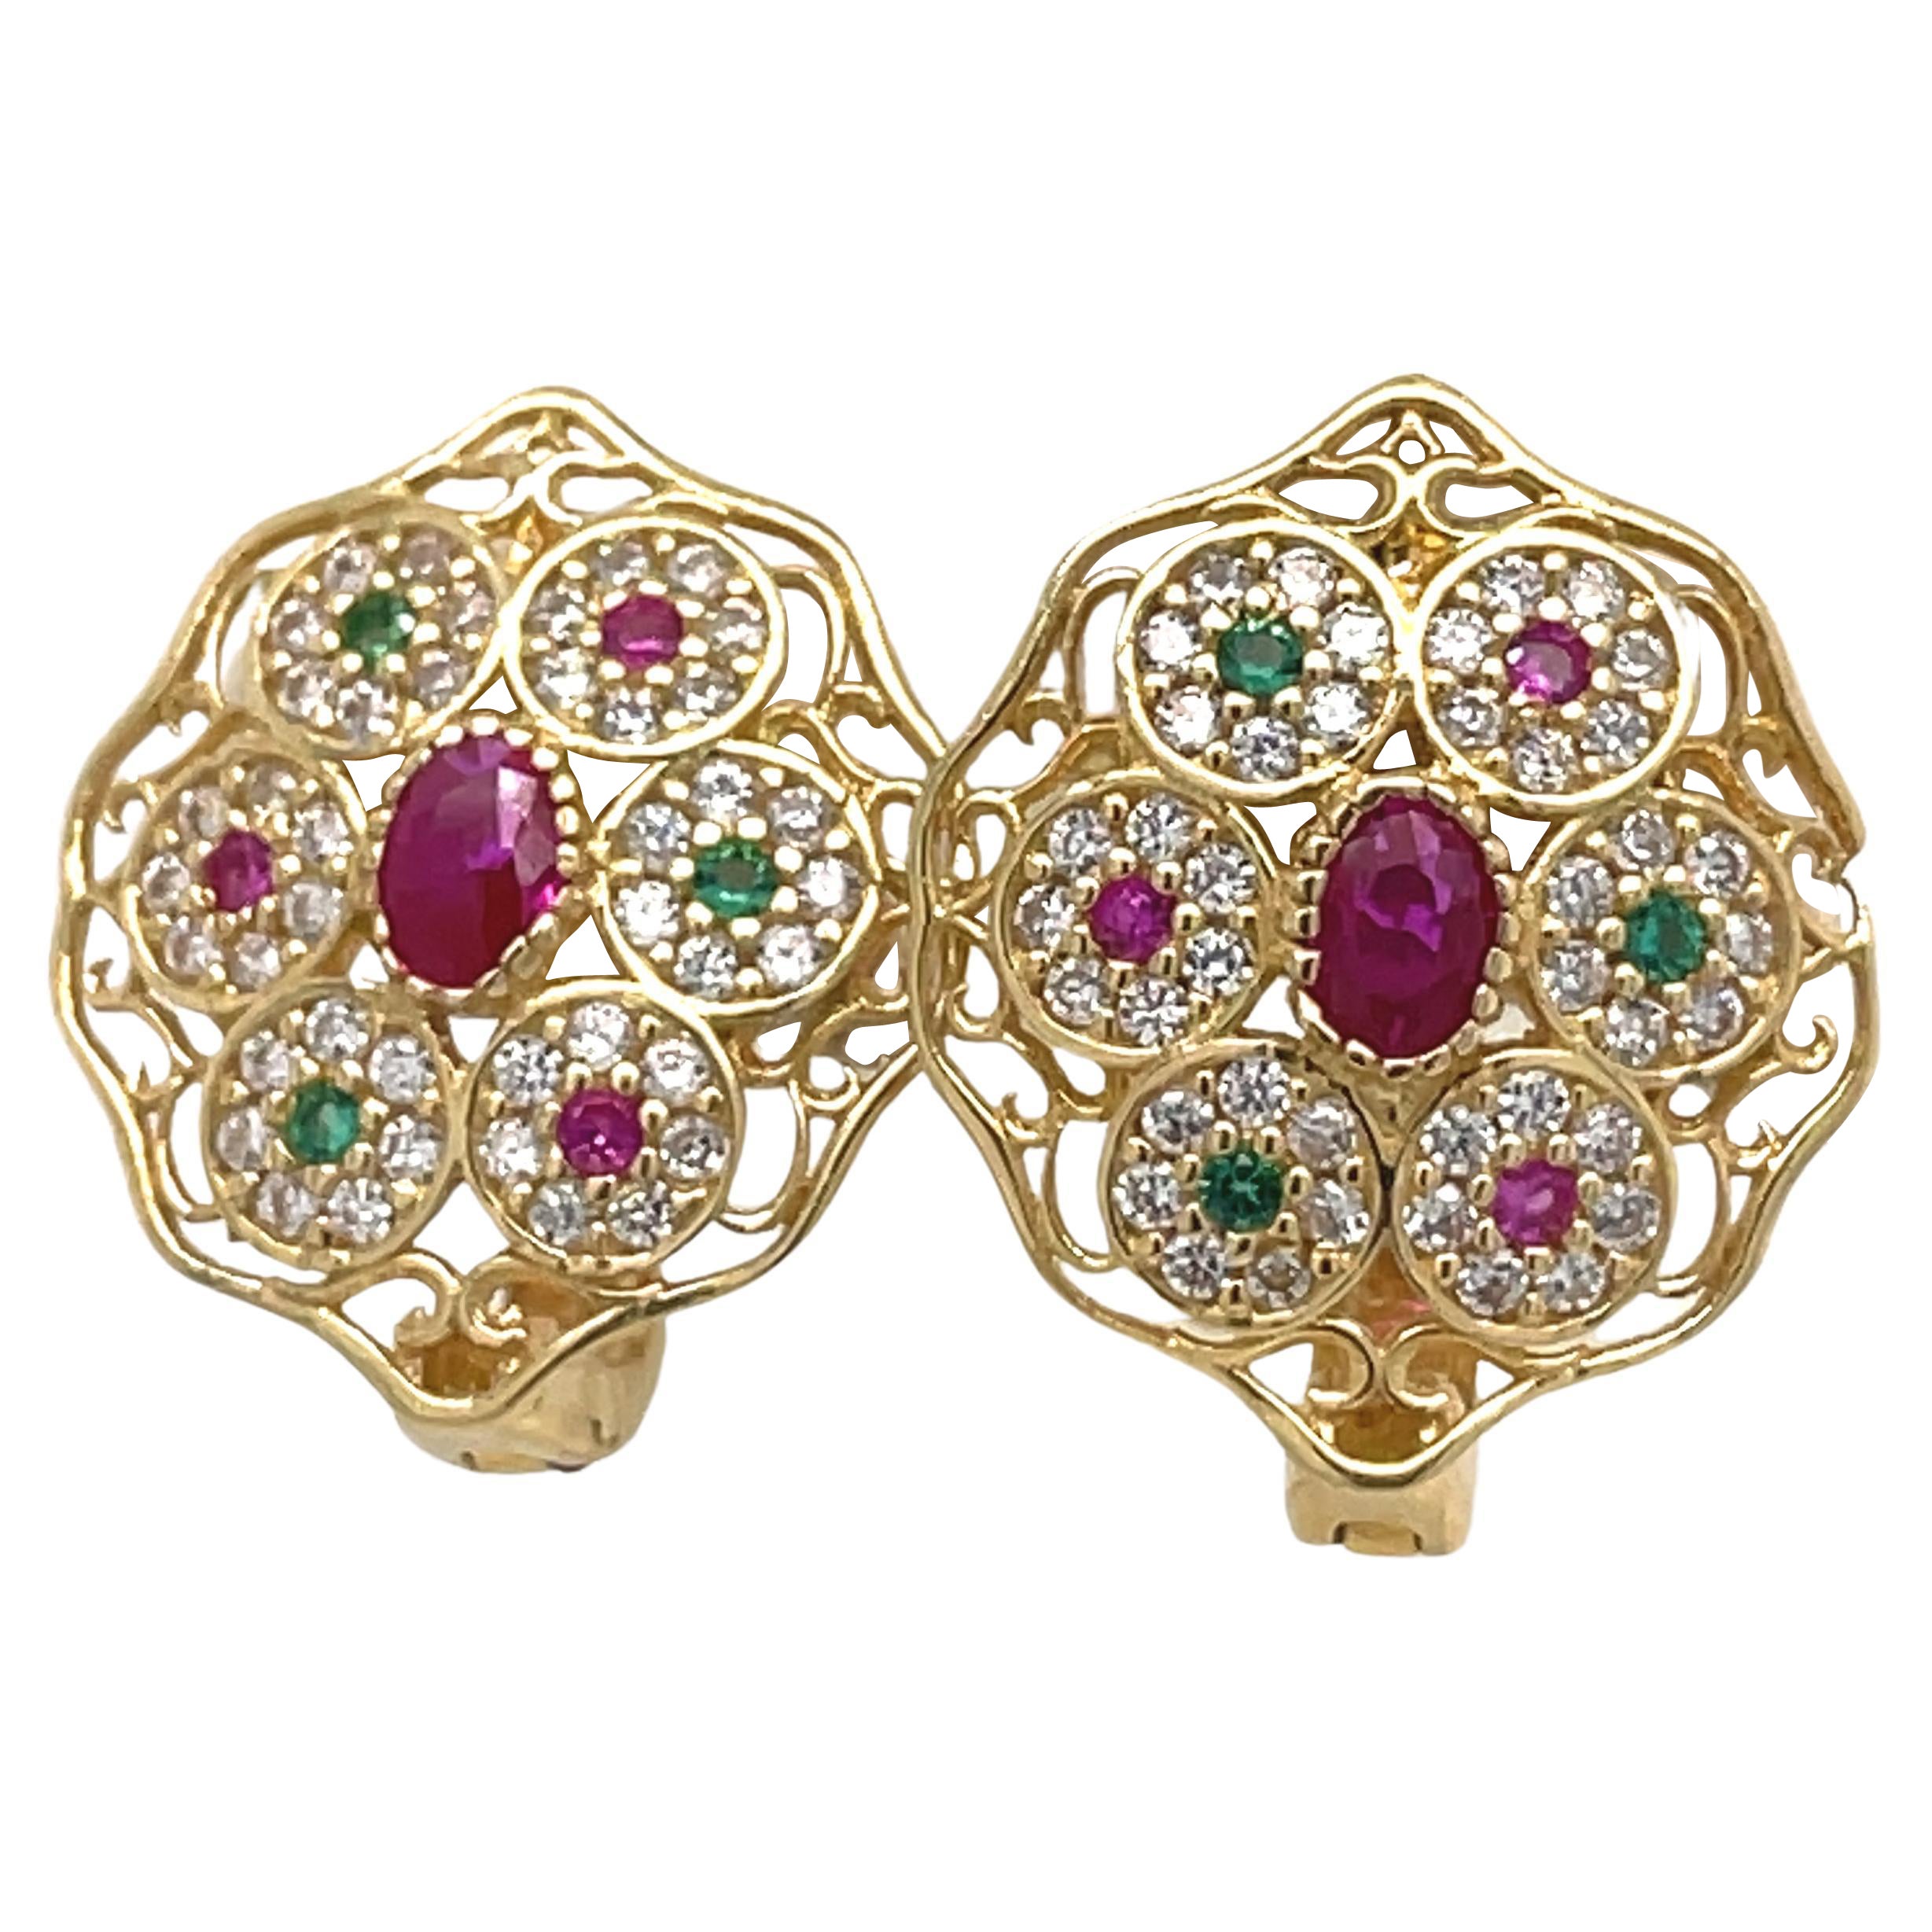 Vintage Art Deco Earrings- 18k Yellow Gold Oval+Round Multi-Color Cubic Zirconia

~~ S e t t i n g ~~
Solid 18k Yellow Gold
4.31 grams
 Size : 17.20 x 14.55

~~ Stones ~~
Main Stone:
Oval Shape Cubic Zirconia In Weight Of 0.30 Ct (Approx.)
Color  -